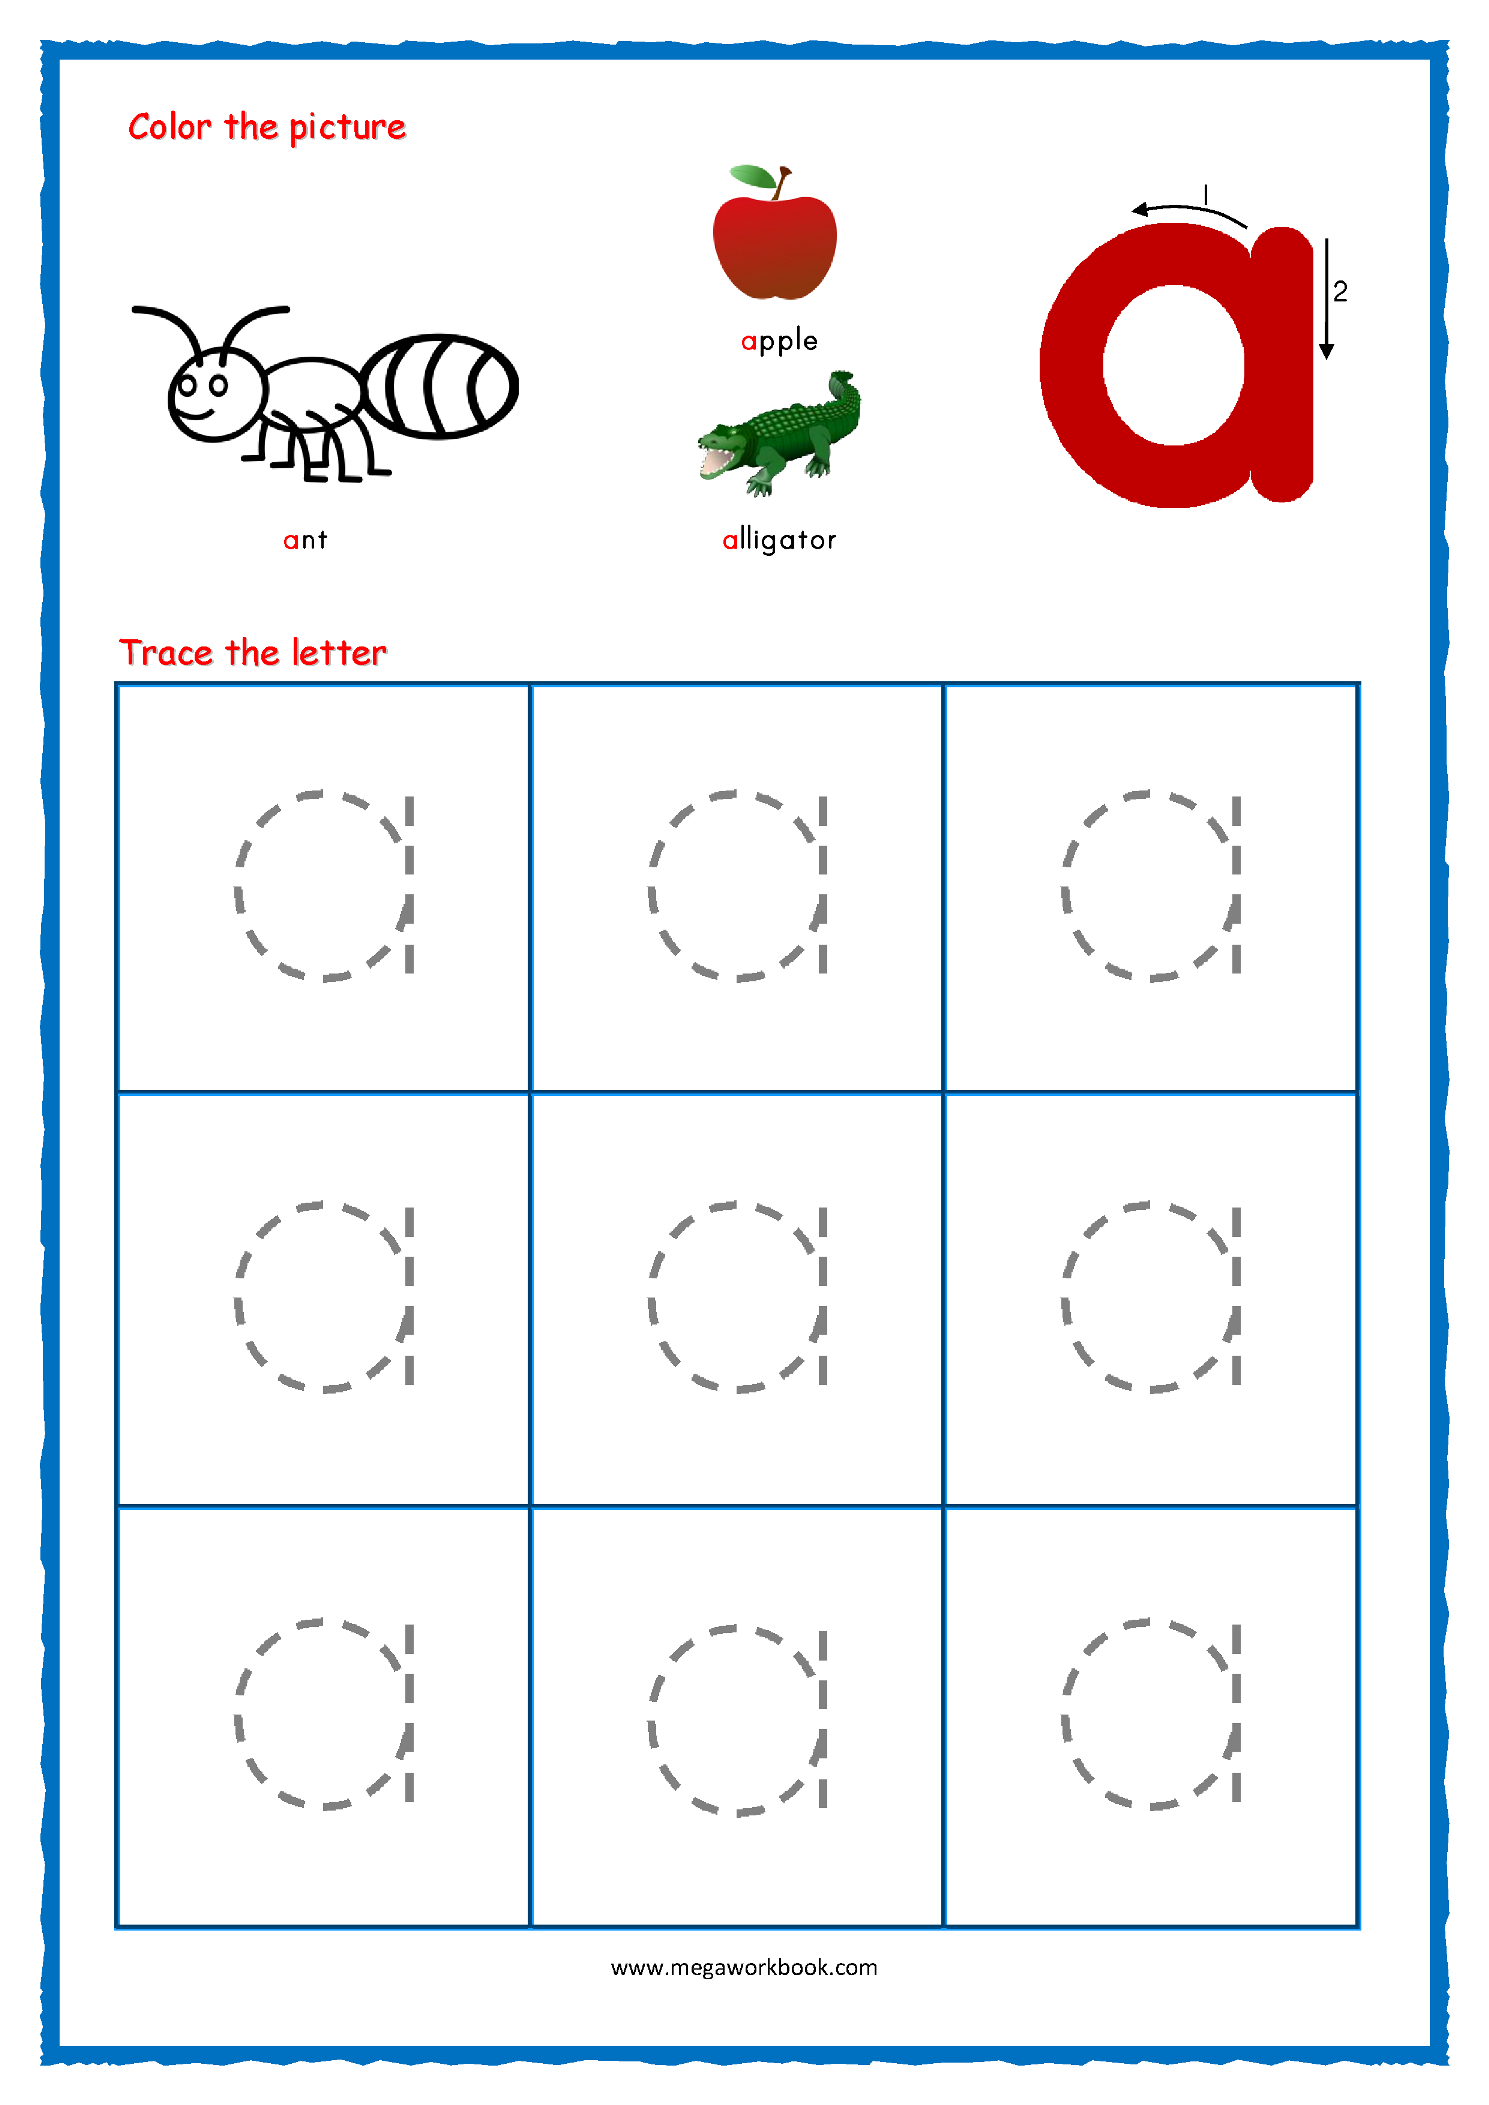 Alphabet Tracing - Small Letters - Alphabet Tracing for English Small Letters Tracing Worksheets